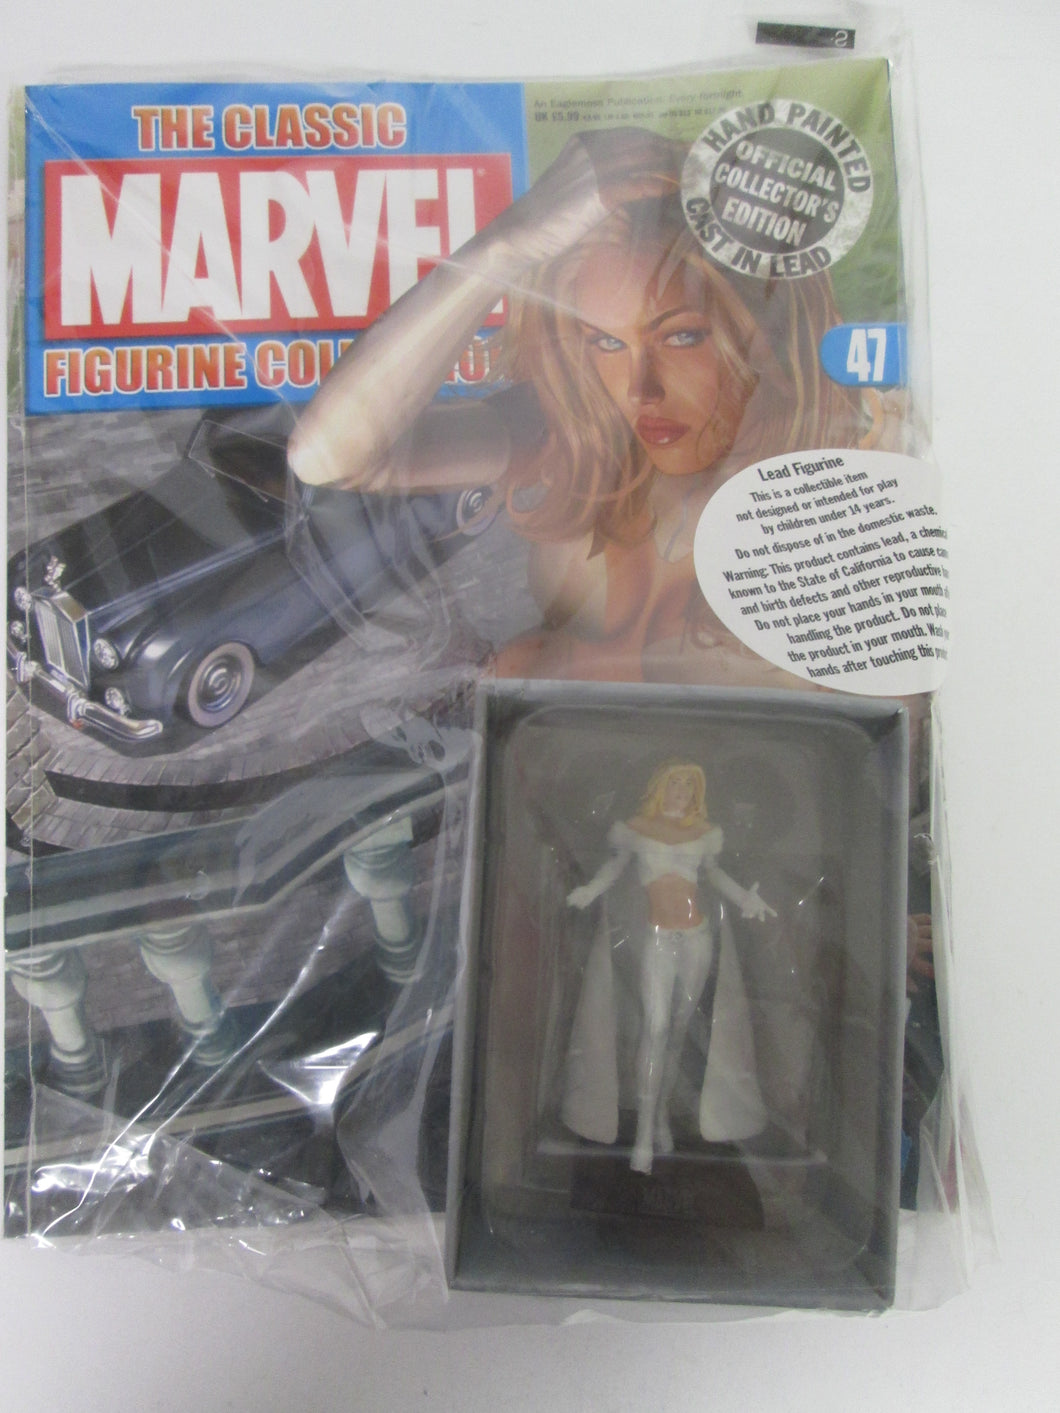 Classic Marvel Figurine Collection #47 Emma Frost Hand Painted Cast in Lead Magazine and Figure